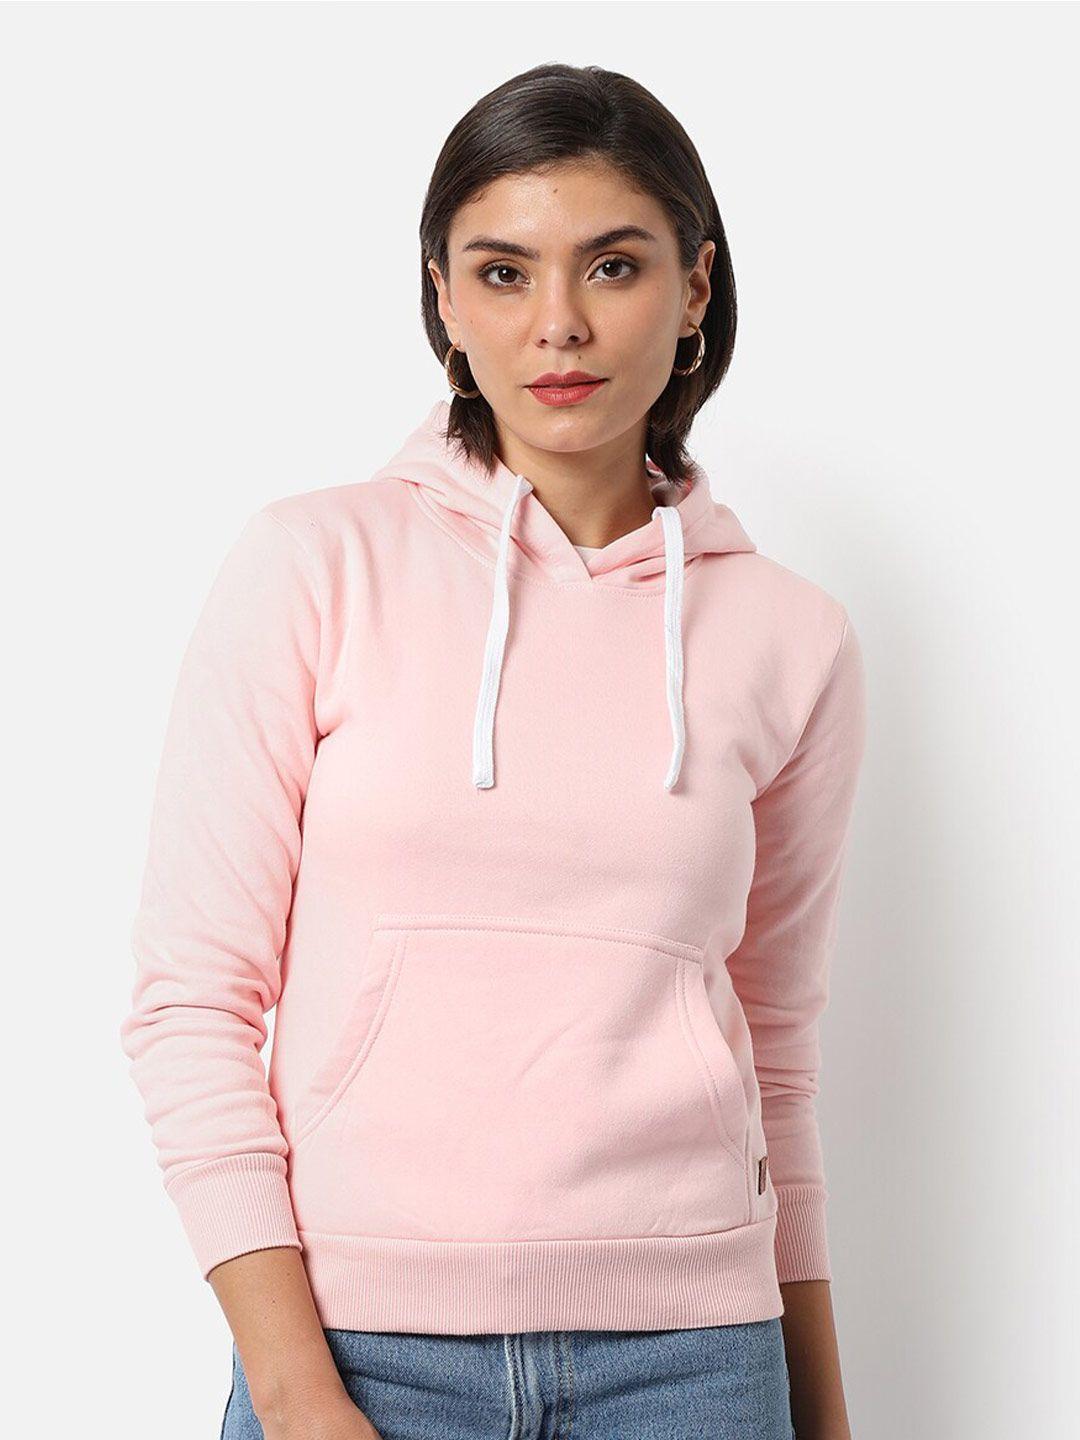 campus-sutra-women-pink-solid-hooded-pull-over-sweatshirt